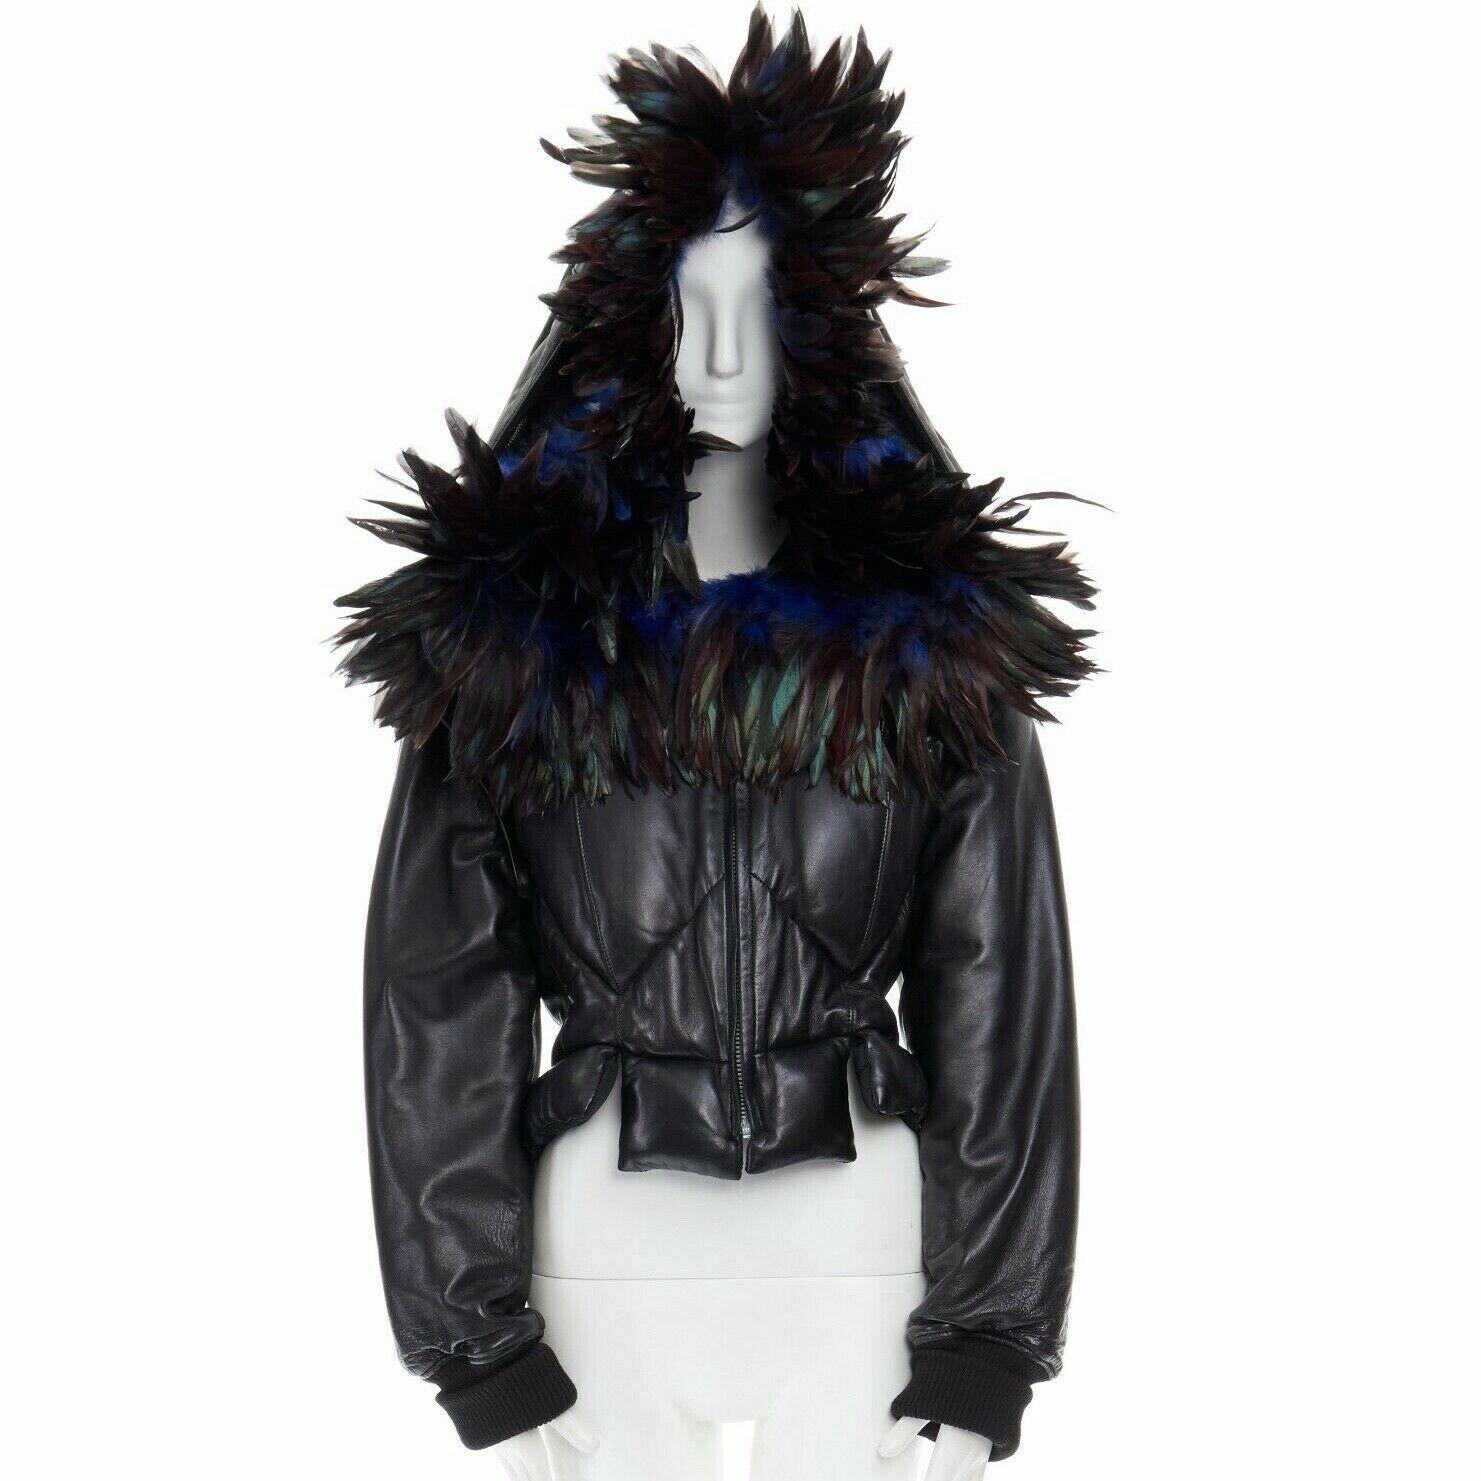 YOHJI YAMAMOTO
FROM THE FALL WINTER 2005 RUNWAY
Leather and feather • Black padded jacket • Cropped fit • Extremely oversized hood trimmed with blue bird feathers • Zip front closure with silver Riri zip pull • Fitted at waist with peplum panels •